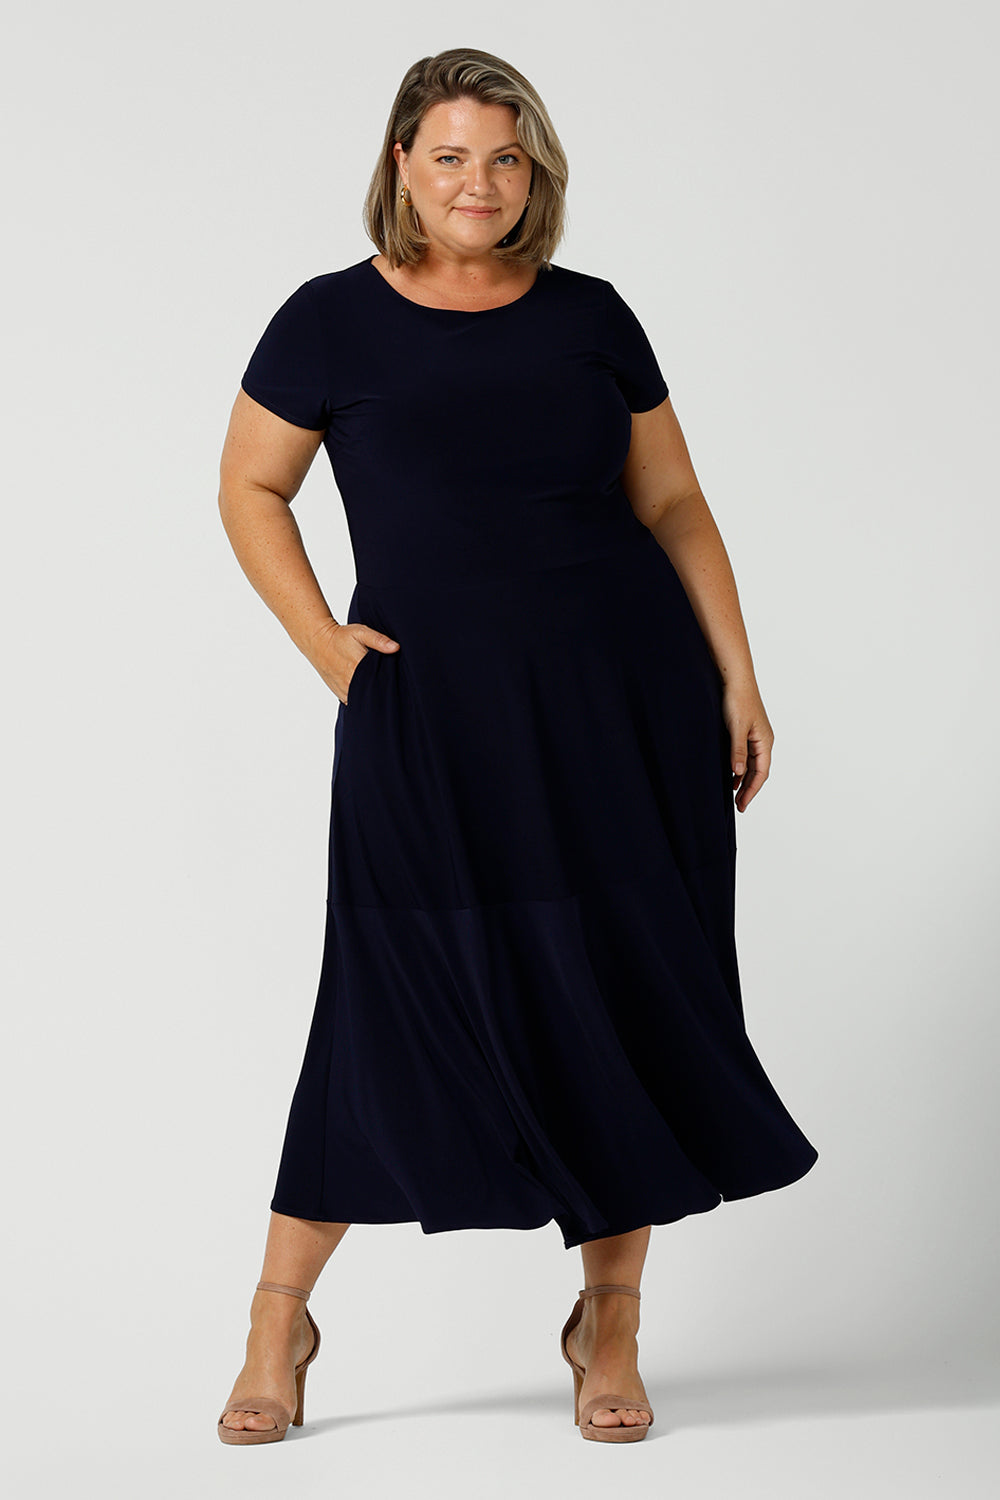 If you're looking for dresses made in Australia, look to this elegant navy dress shown on a curvy, size 18 woman as a plus size dress. This high neck, short sleeve dress with flared skirt and ruffle hemline is a good workwear dress as well as a classic cocktail dress. With a midi-length skirt, shop this dress in plus sizes as well as petite thanks to made-in-Australia ladies clothing brand, Leina & Fleur.